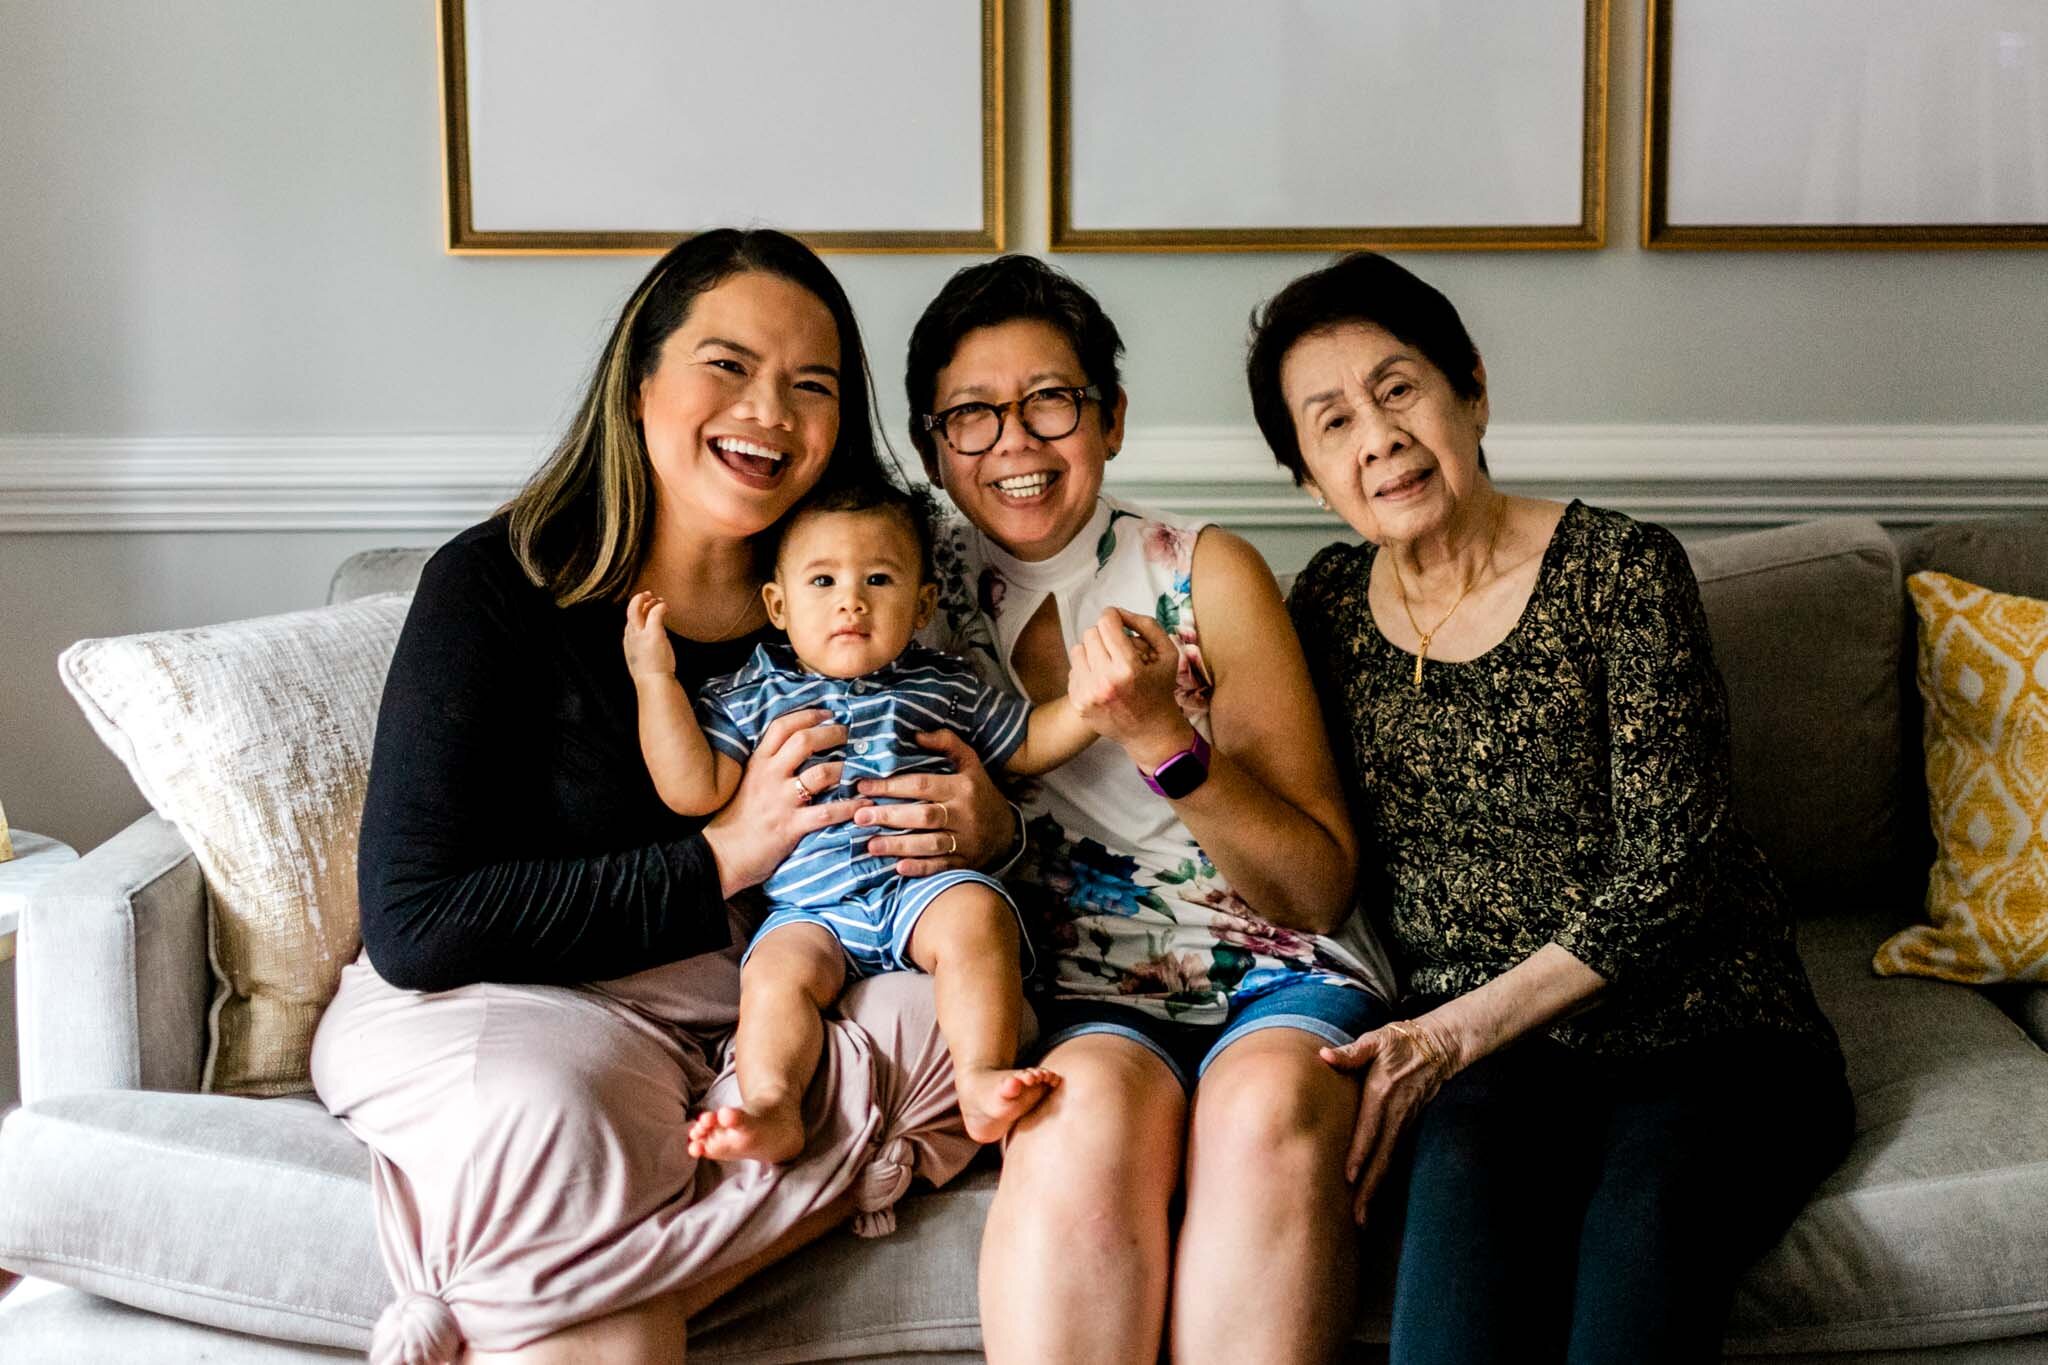 Raleigh Family Photographer | By G. Lin Photography | Lifestyle family photo of women with baby sitting on couch